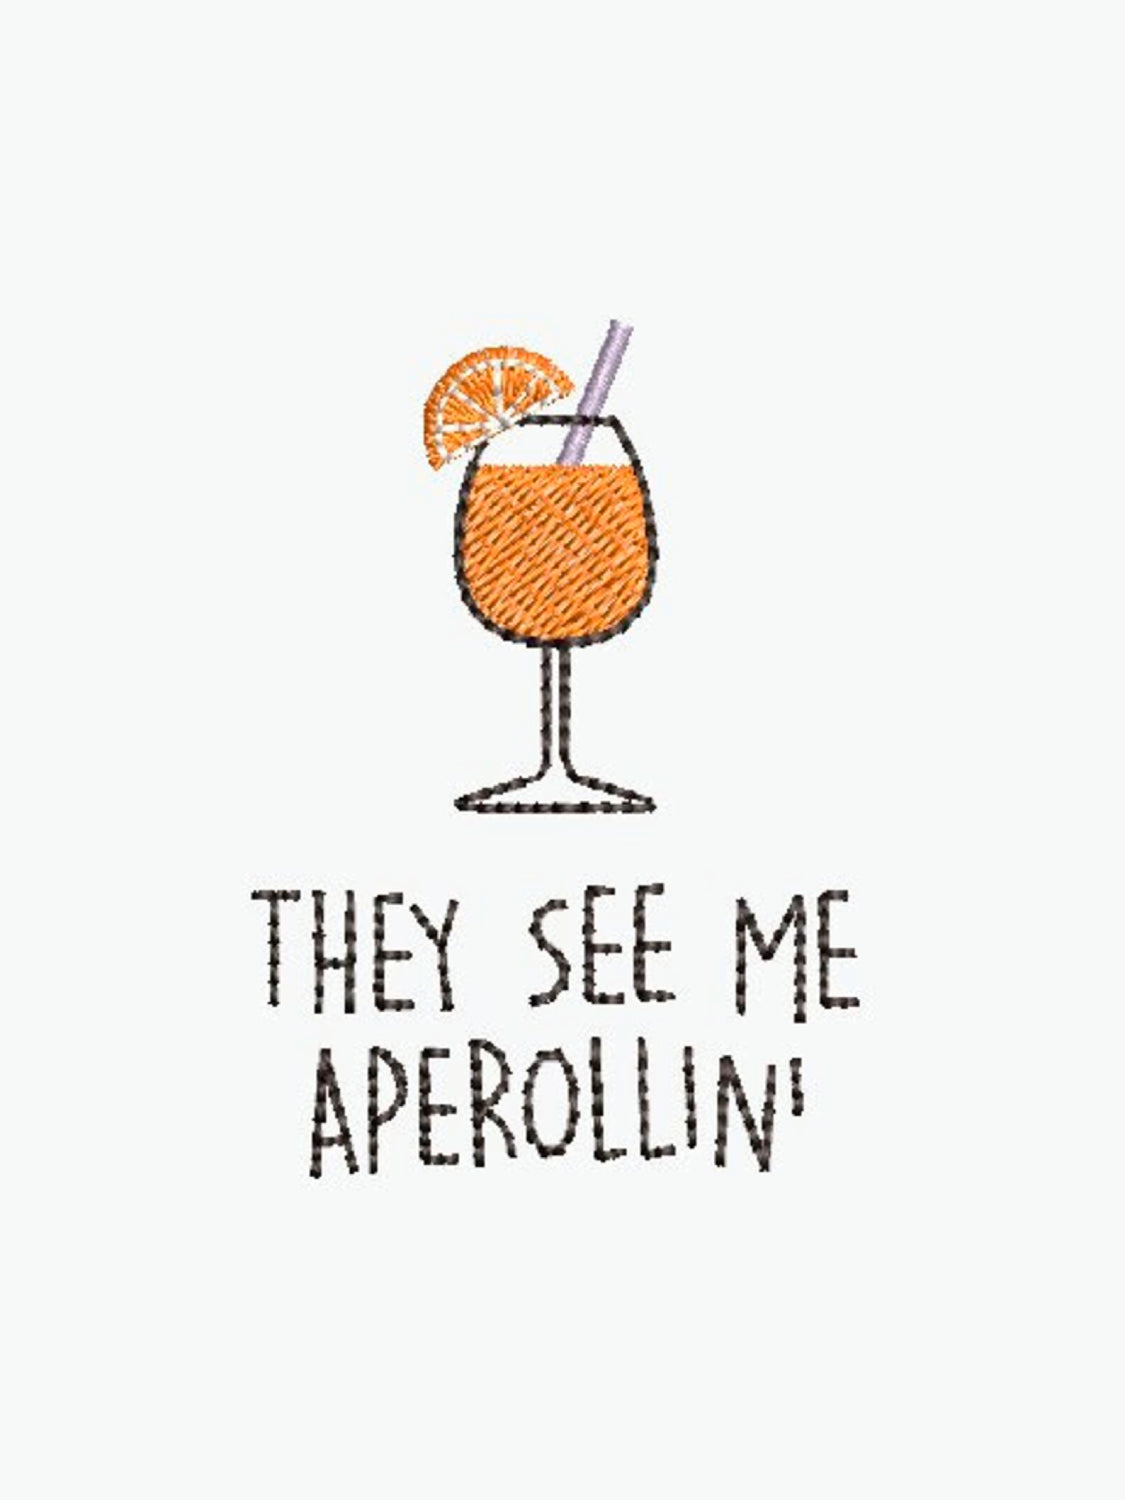 T-SHIRT "THEY SEE ME APEROLLIN' " - Col. bianco